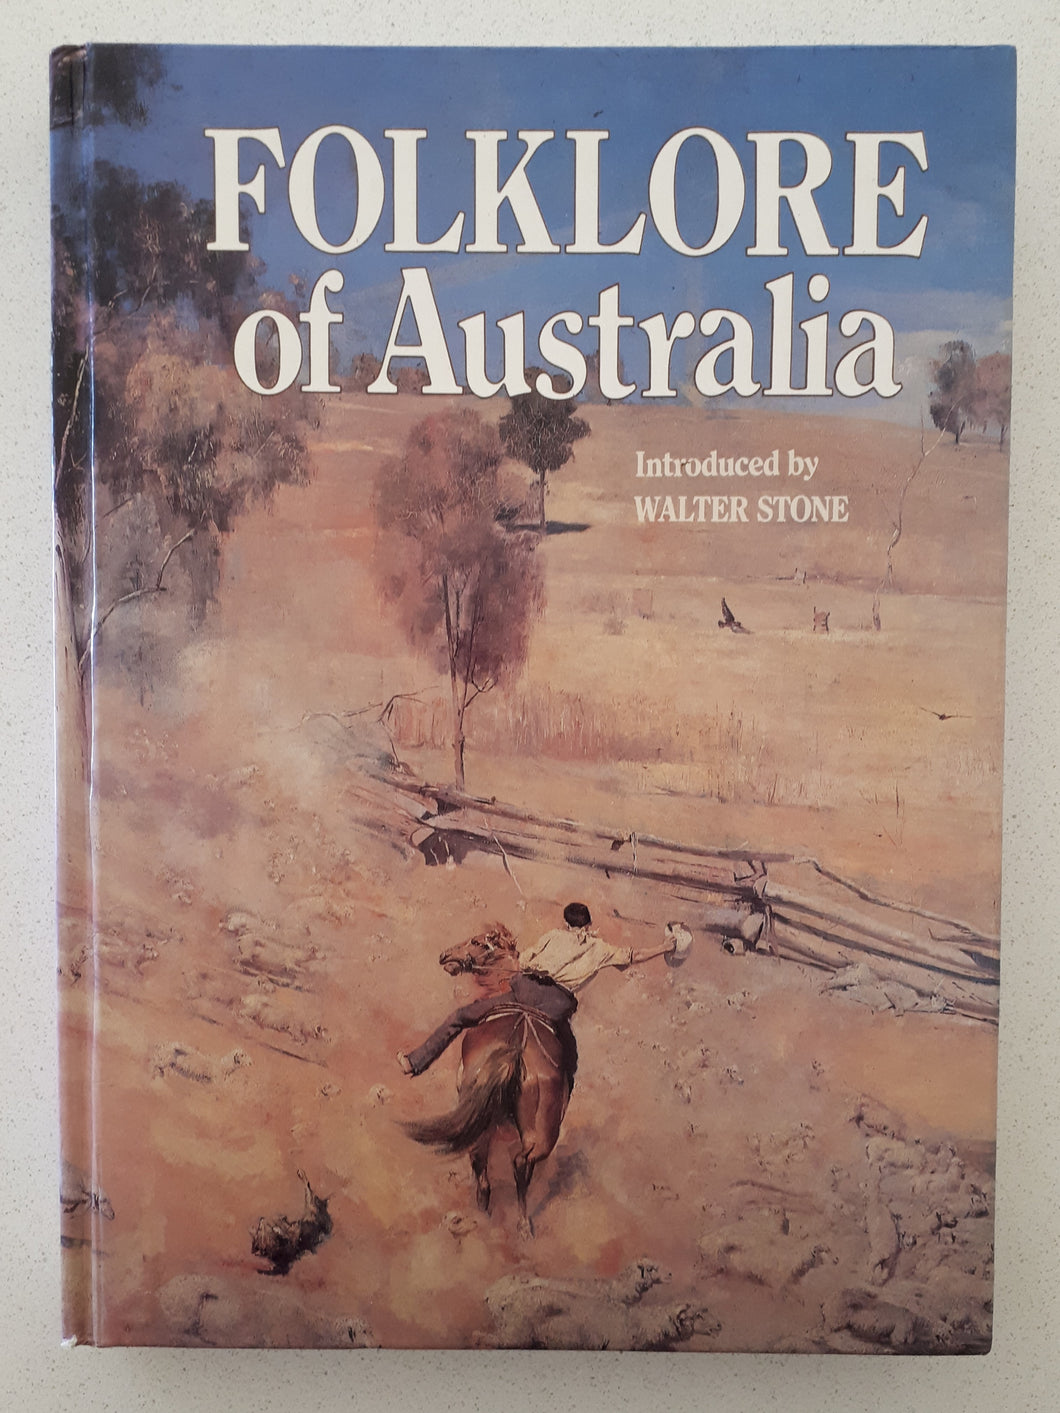 Folklore of Australia Introduced by Walter Stone